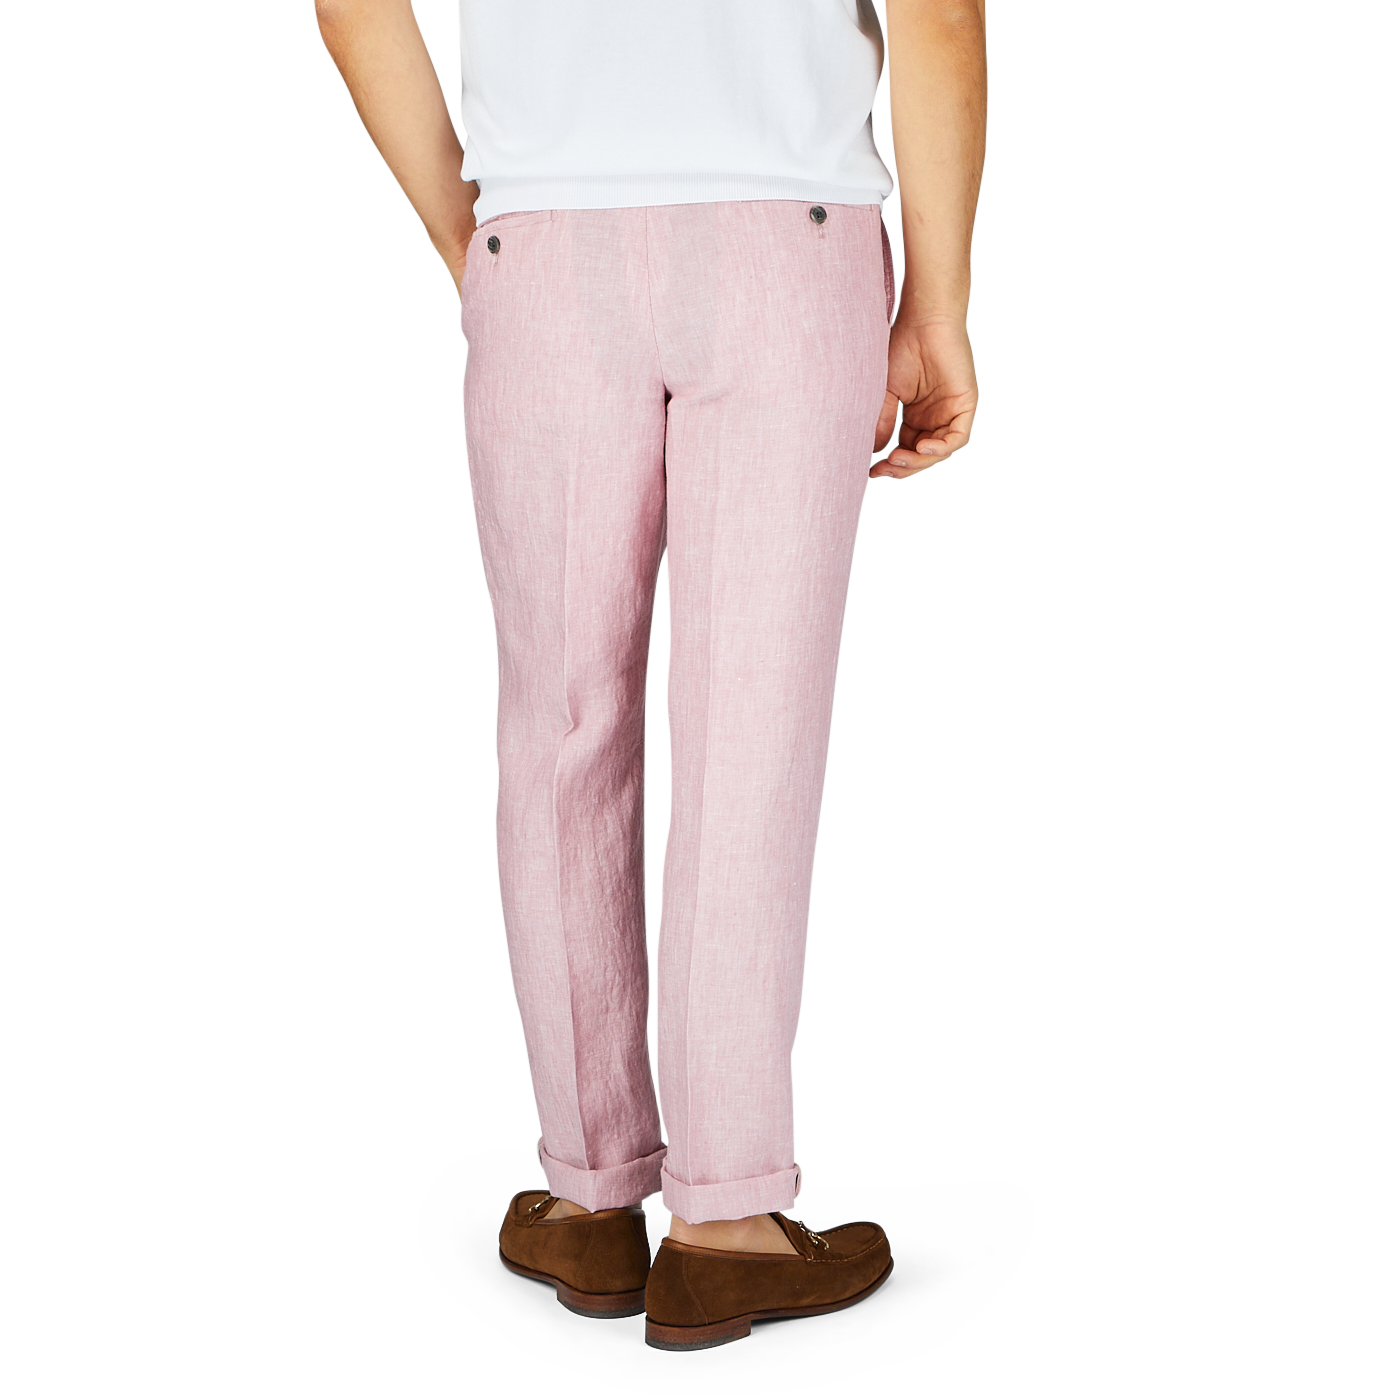 A person wearing Hiltl light pink washed linen regular fit chinos and brown loafers stands against a plain background, showing only from the waist down.